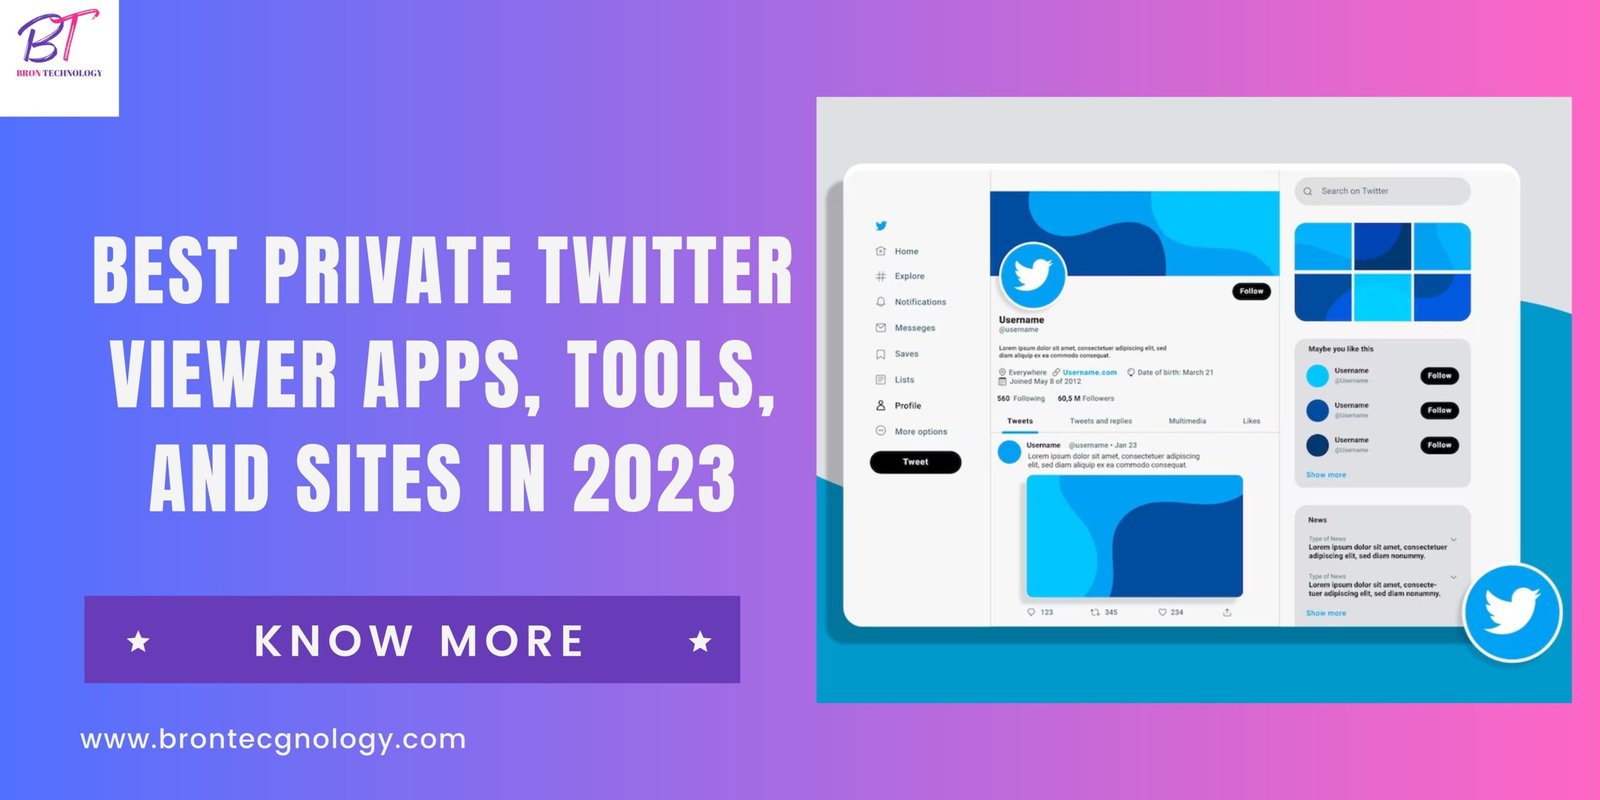 Best Private Twitter Viewer Apps, Tools, and Sites in 2023